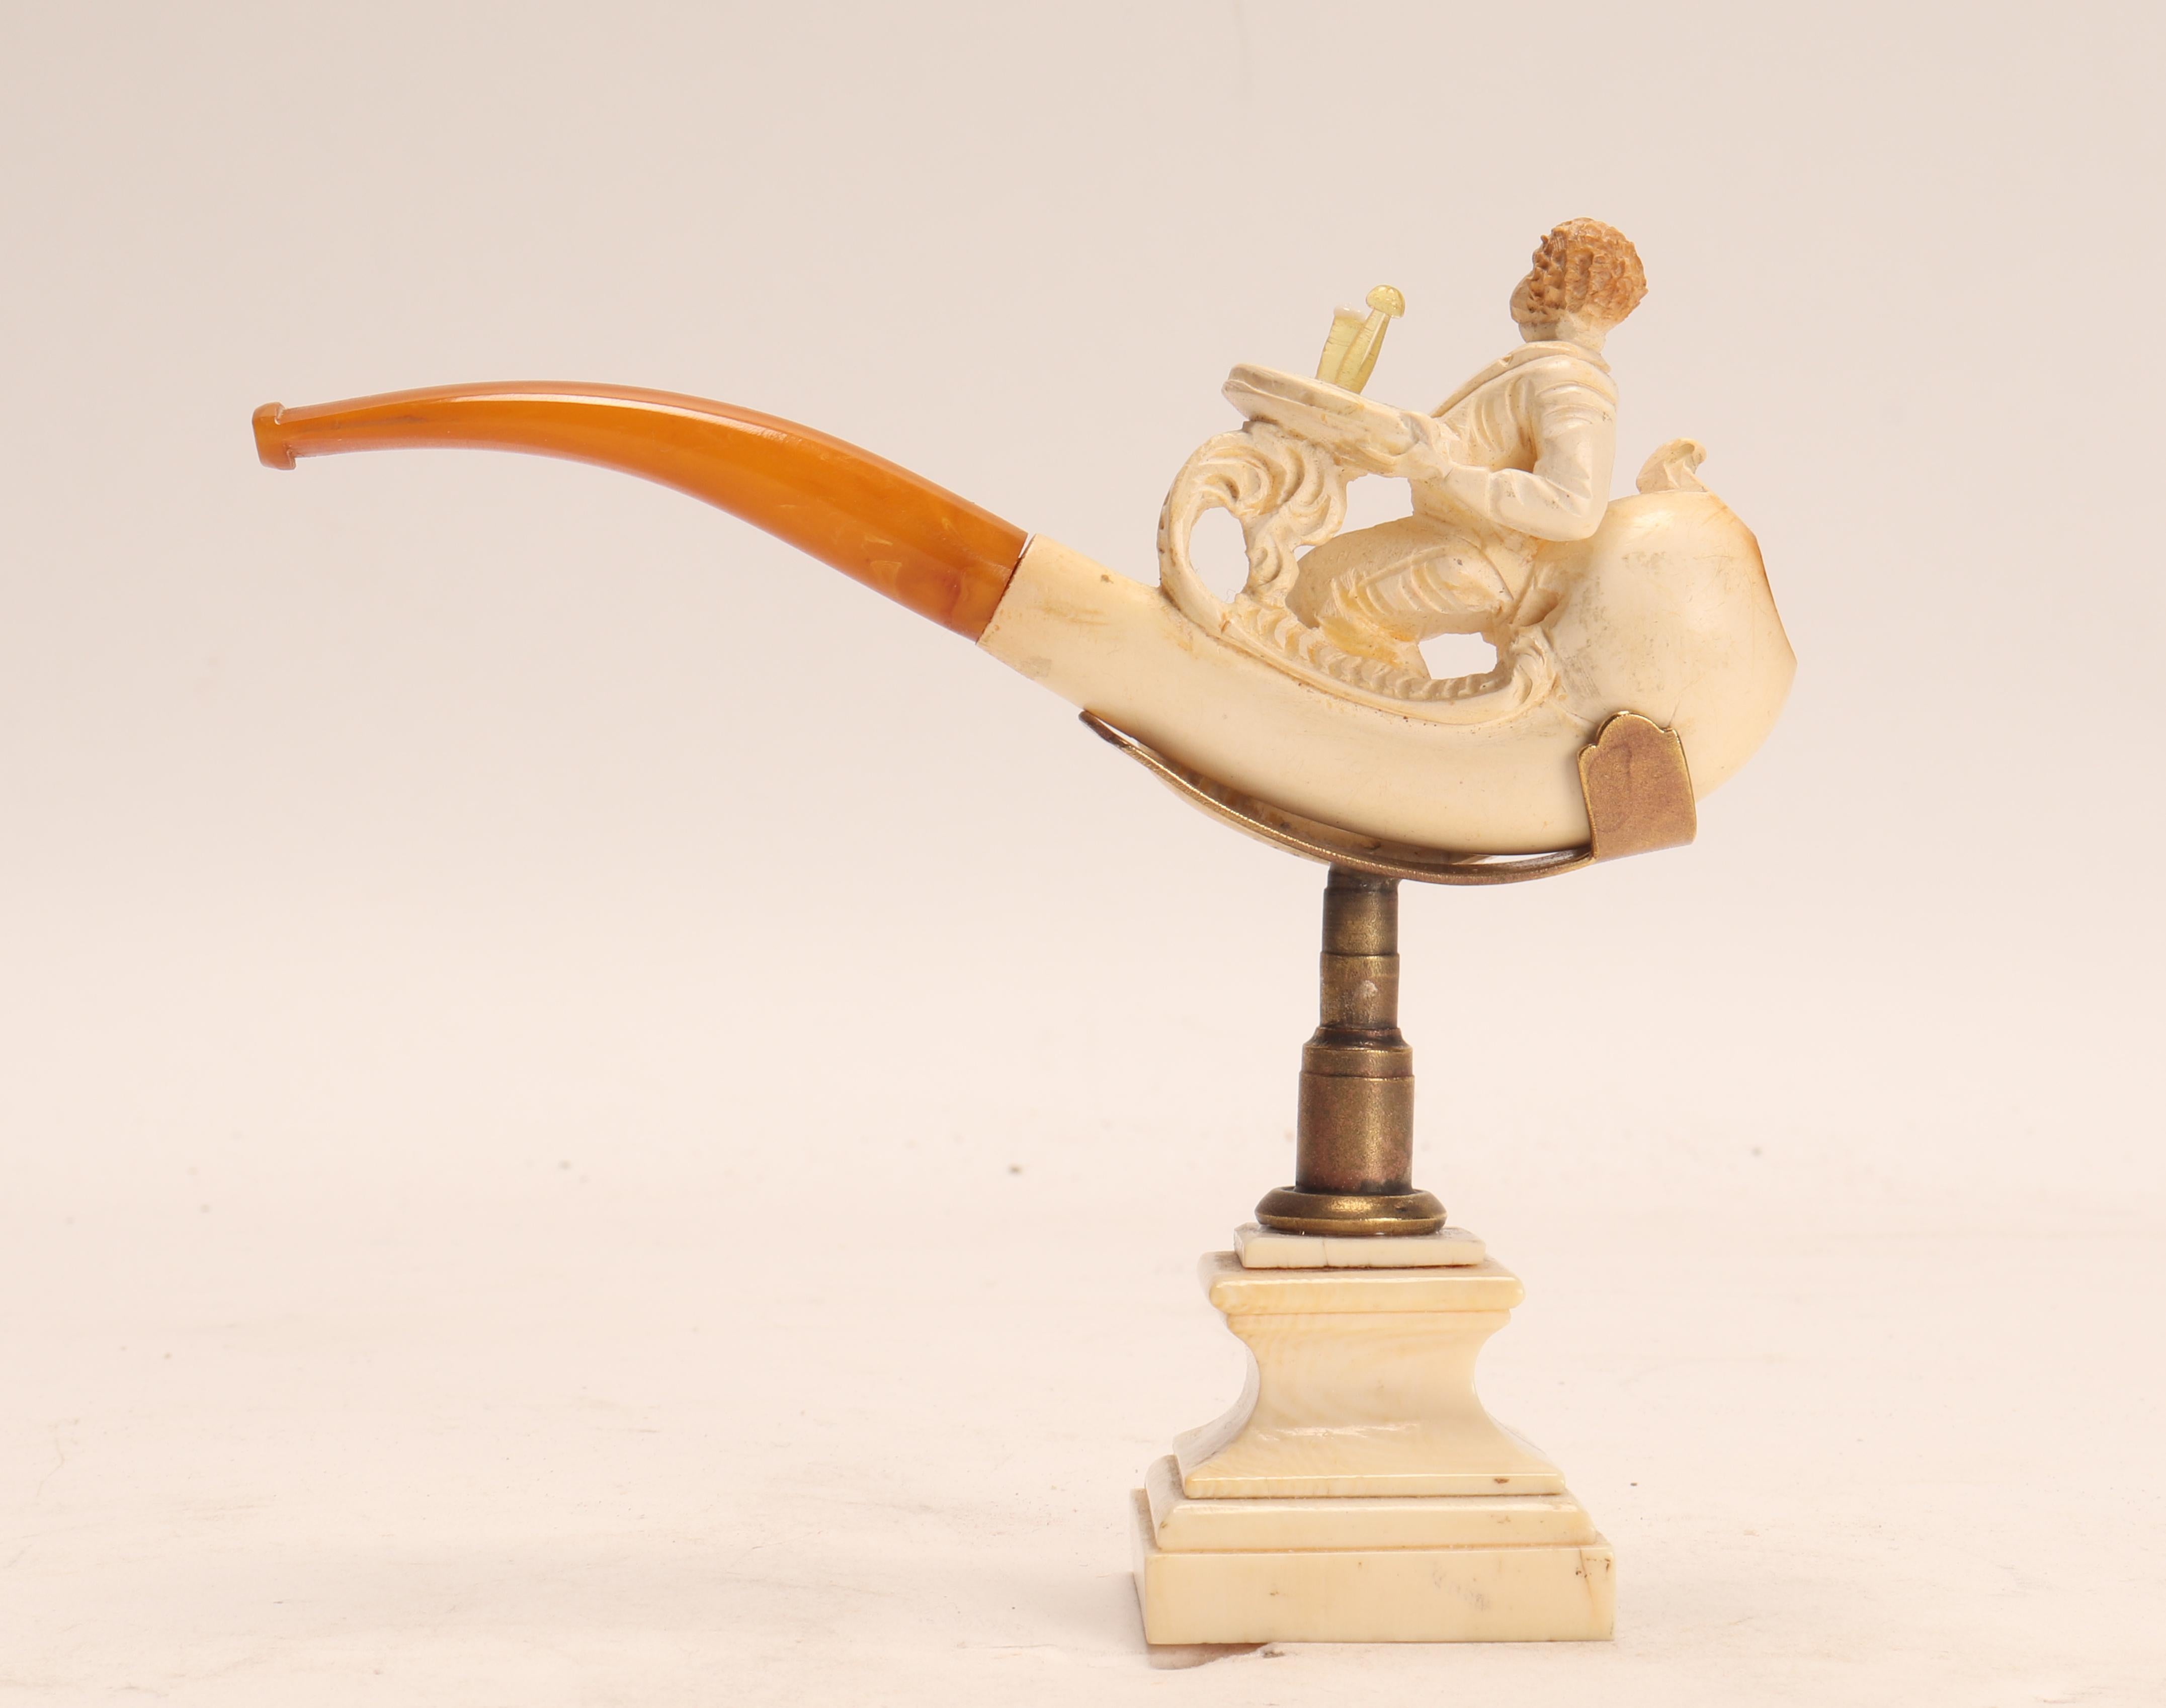 19th Century Meershaum Pipe with a Waiter with the Face of a Monkey, Vienna, 1880 For Sale